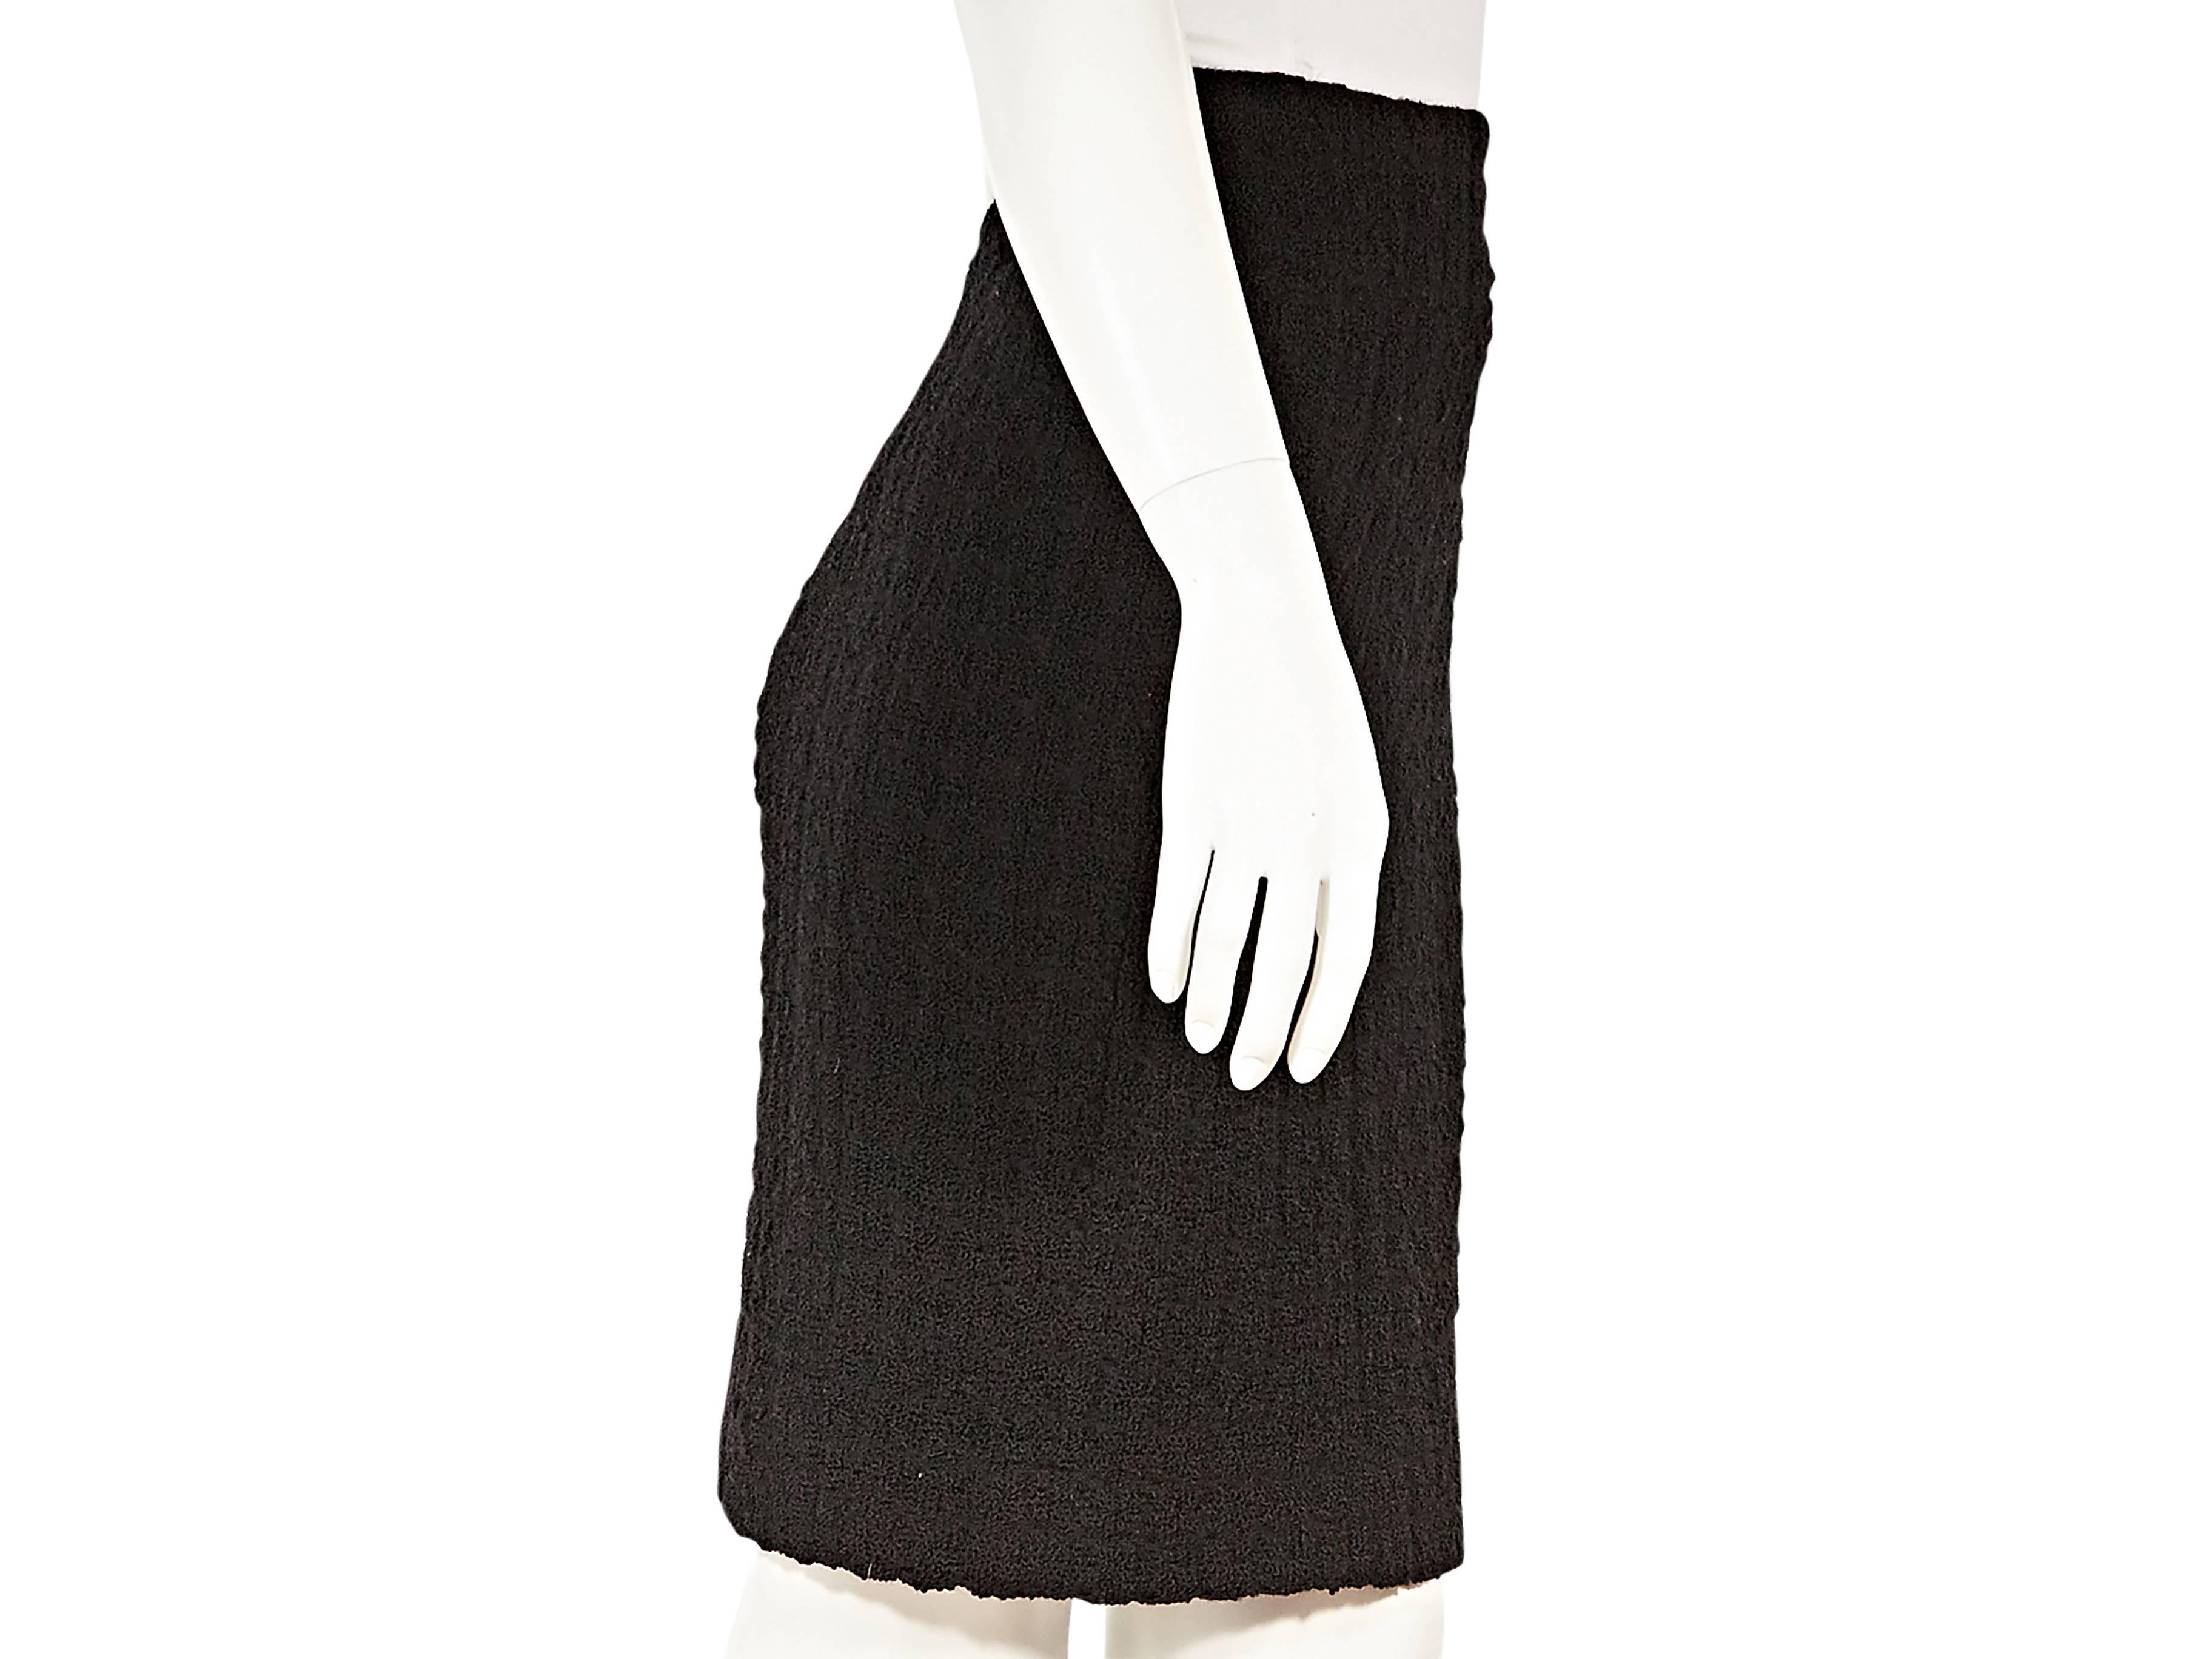 Product details:  Black wool pencil skirt by Chanel.  Wide banded waist.  Concealed back zip closure. 
Condition: Excellent.  